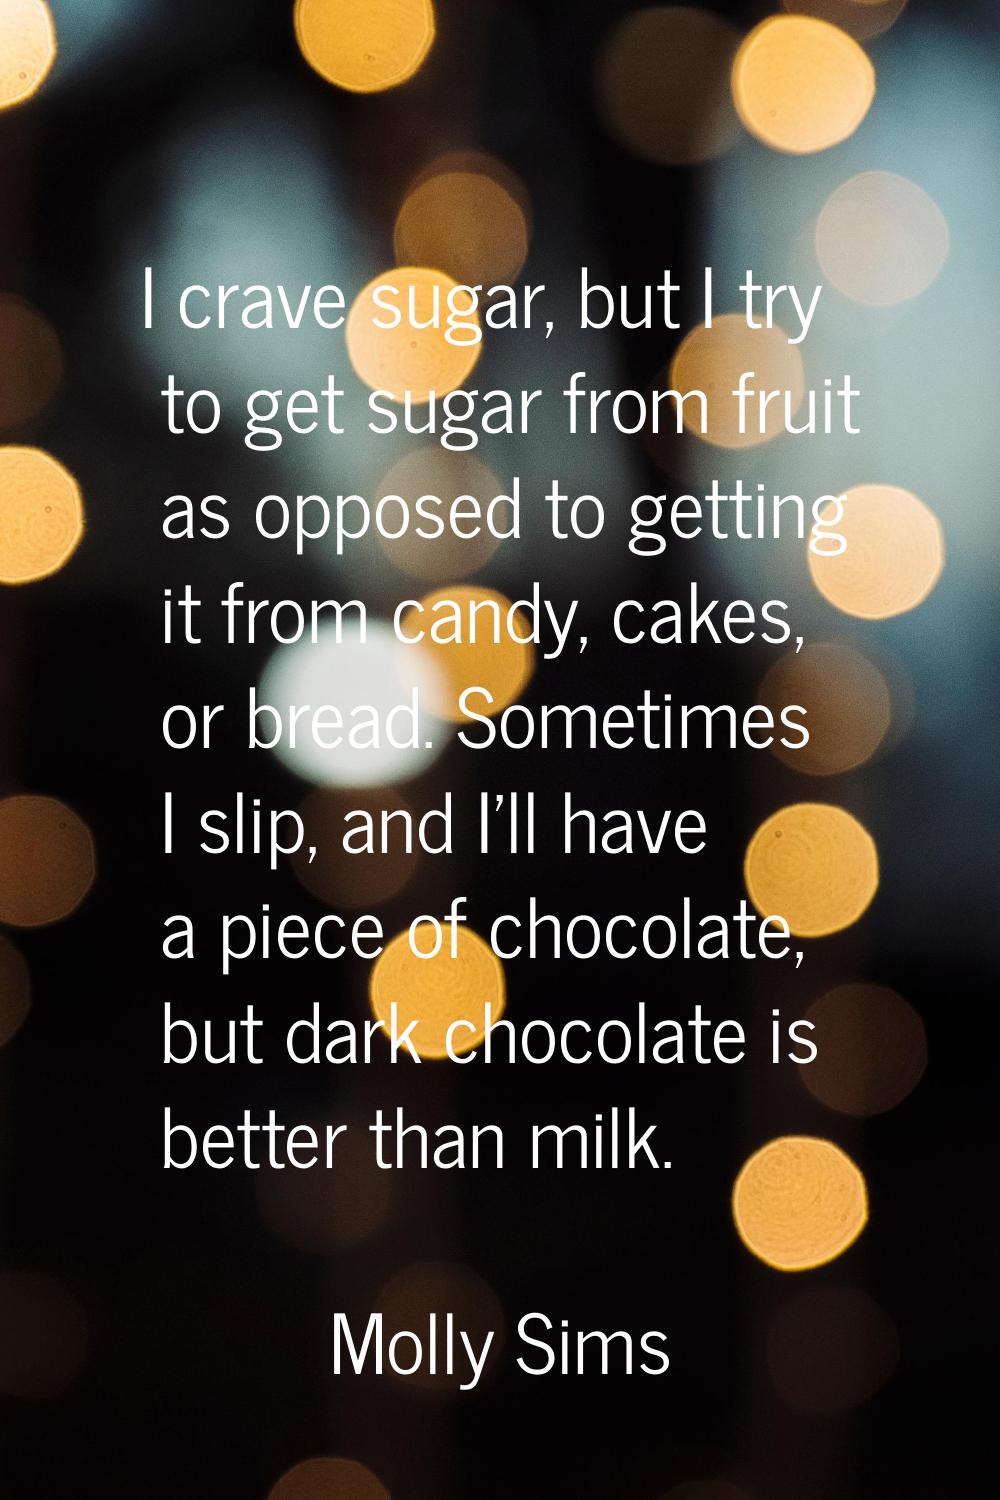 I crave sugar, but I try to get sugar from fruit as opposed to getting it from candy, cakes, or bre